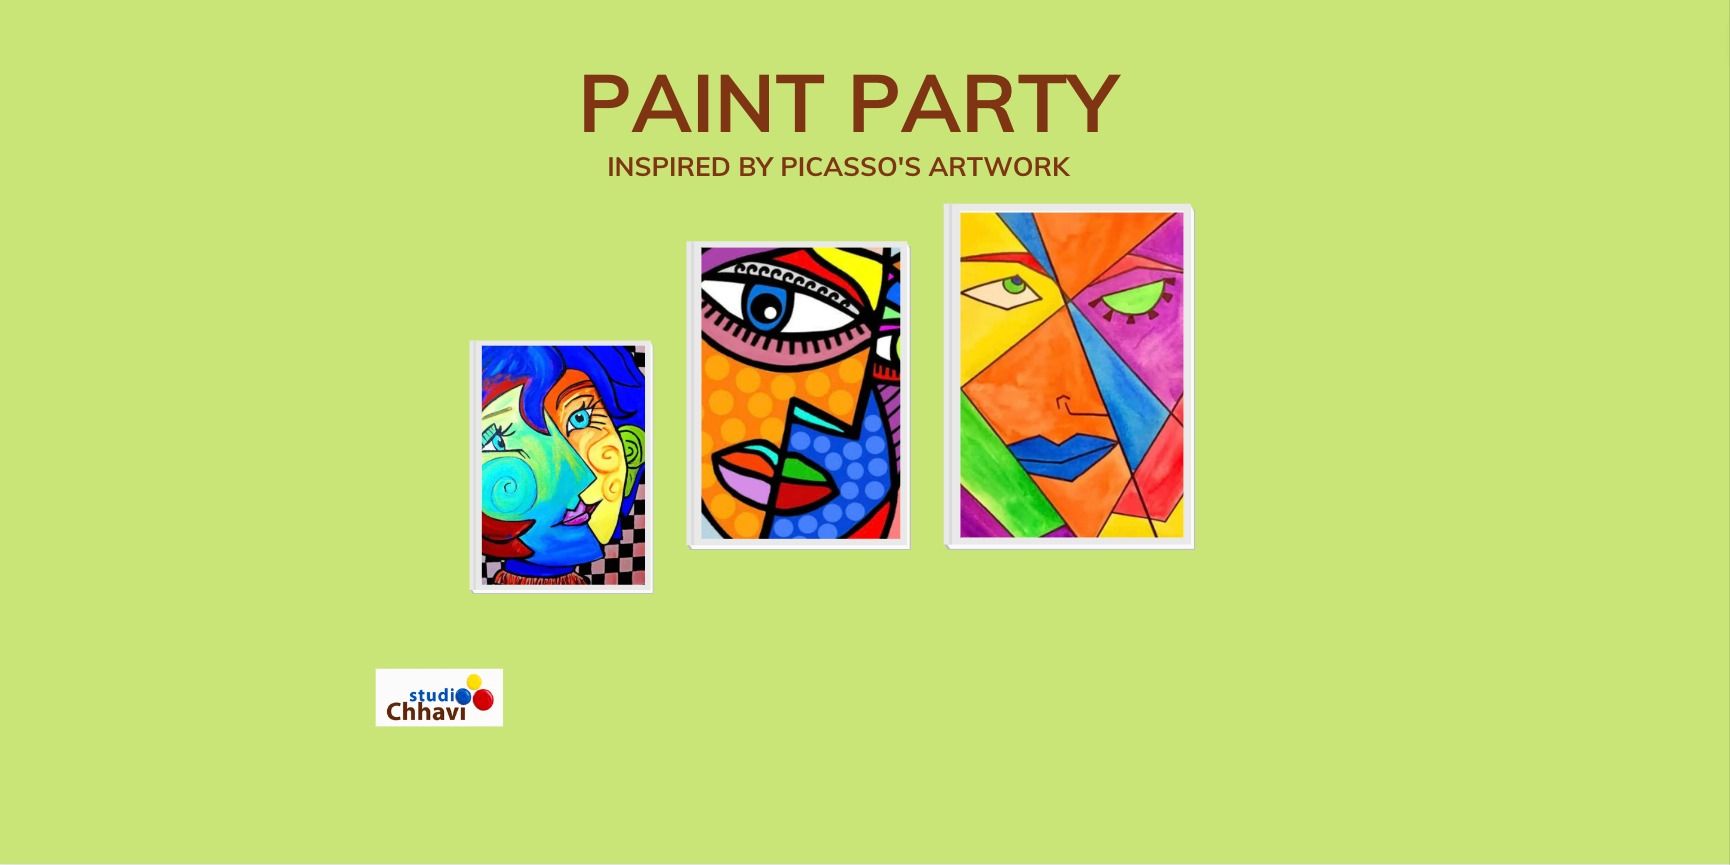 Paint Party- paint like picasso